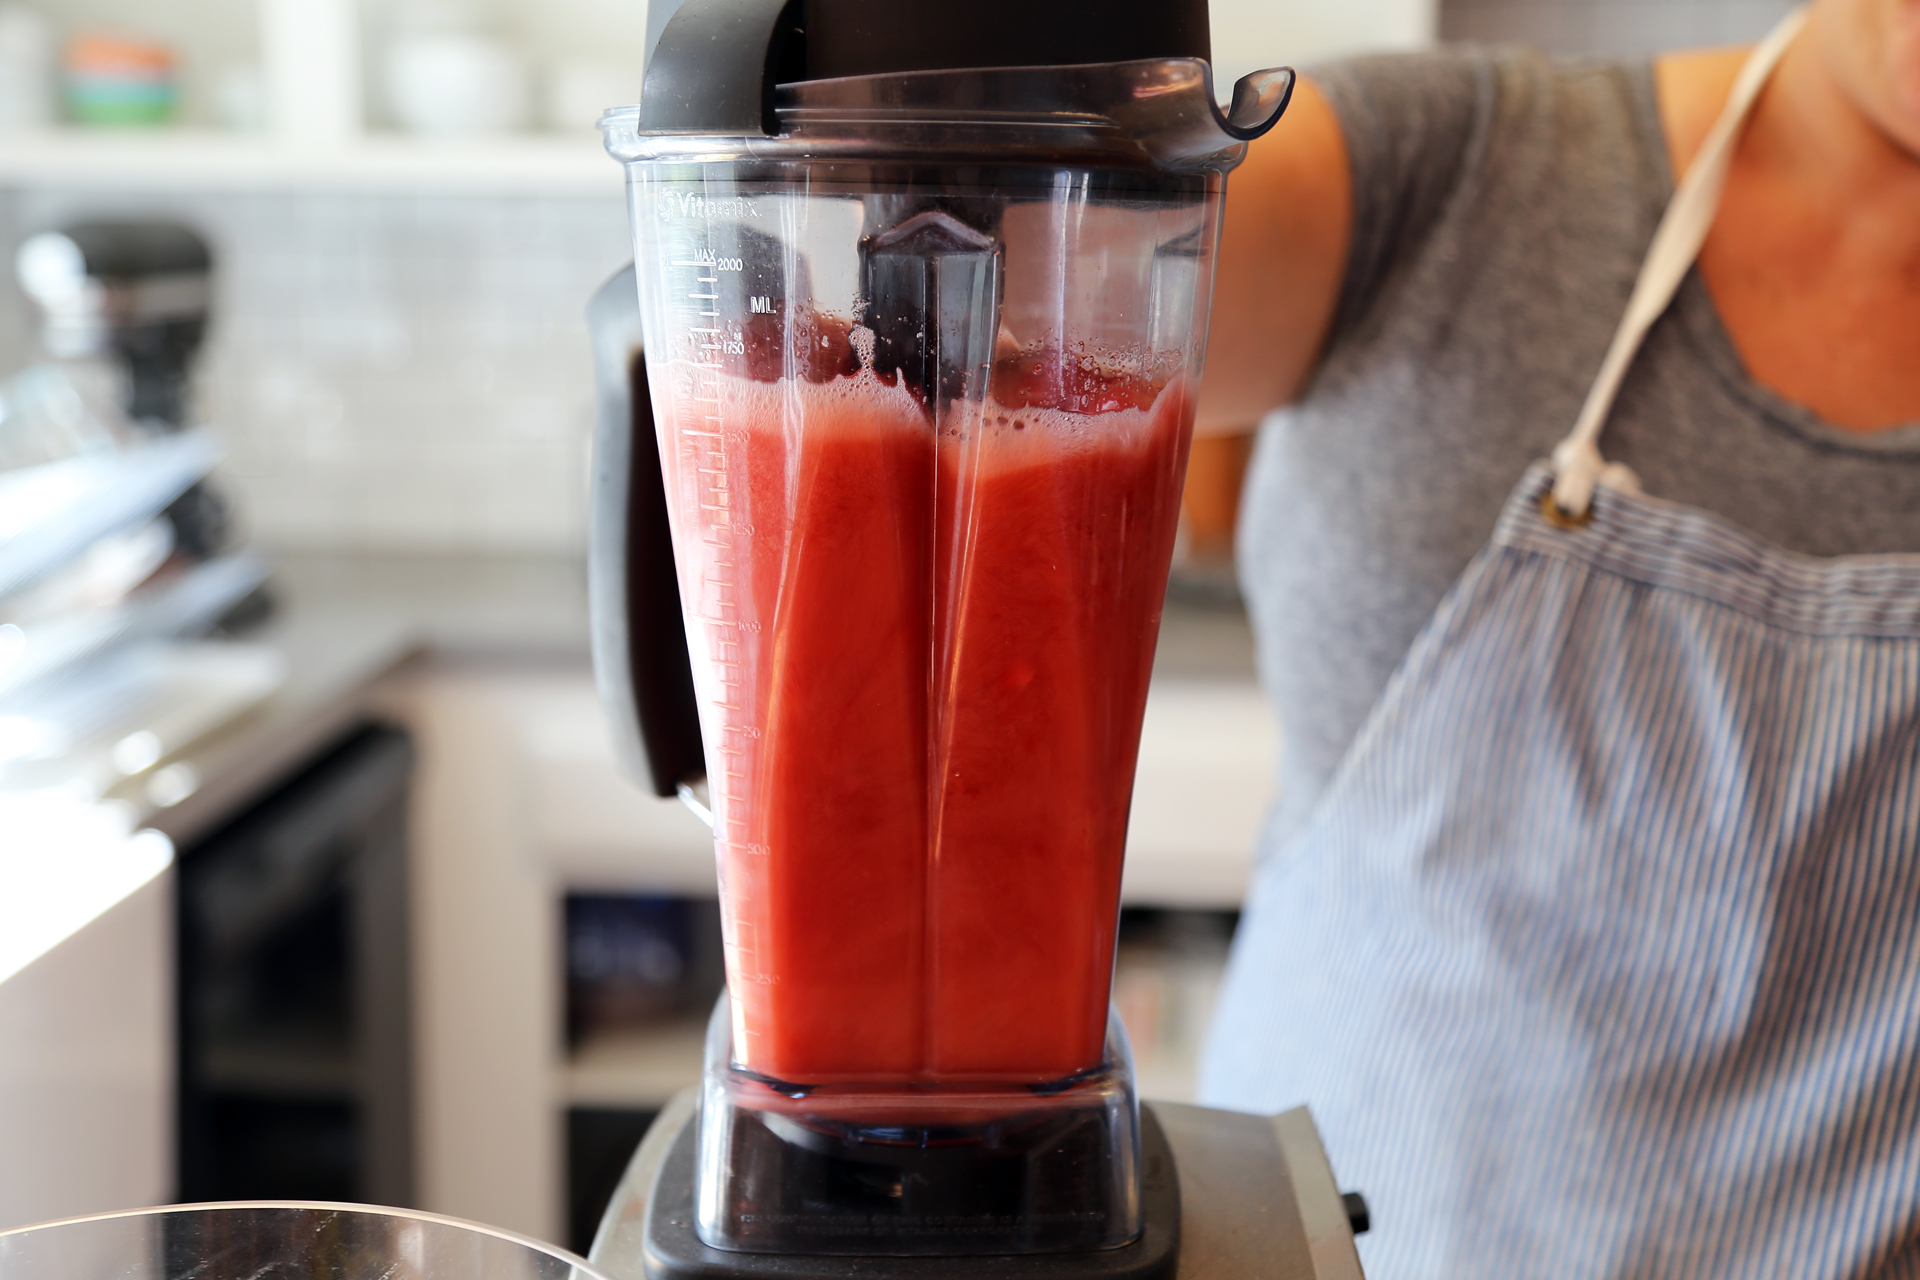 In a blender, blend together the strawberries with the cranberry juice until smooth.